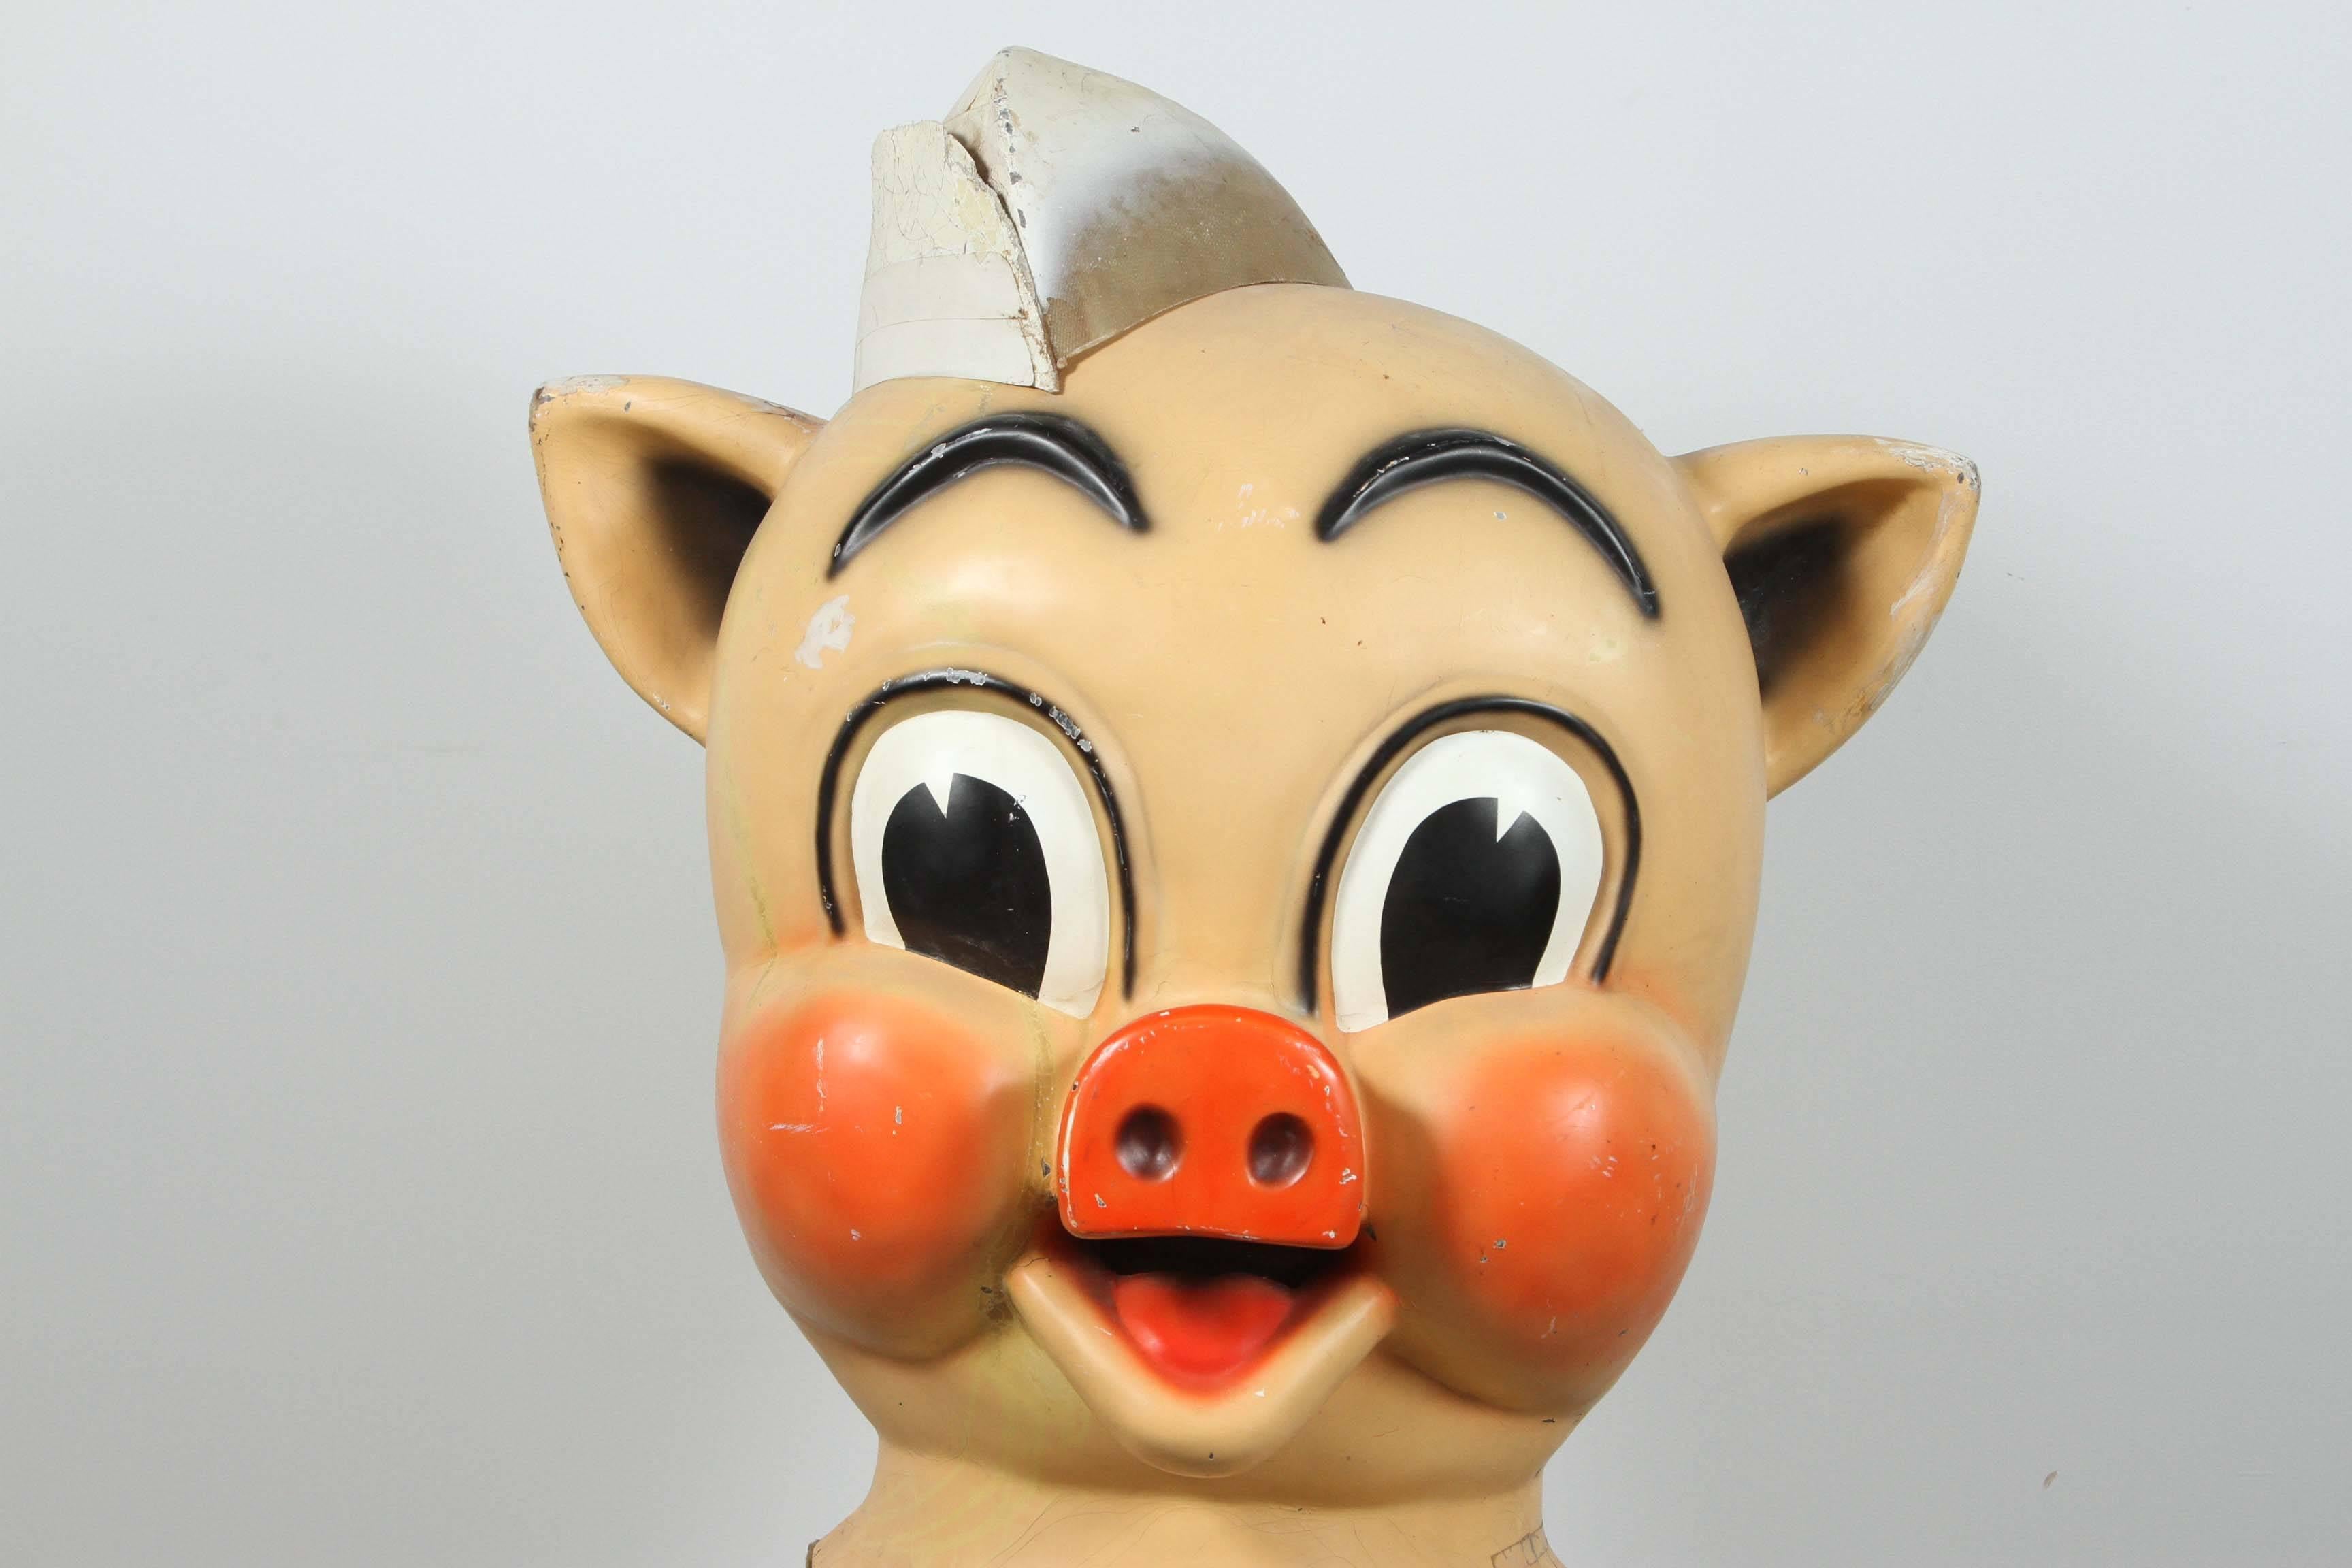 Iconic Piggly Wiggly trade sign parade costume head. Bigger than life and ready to wear a great piece of advertising art!

Piggly Wiggly was founded in Memphis, Tennessee in 1916 and is credited with being the first self-service grocery store. The